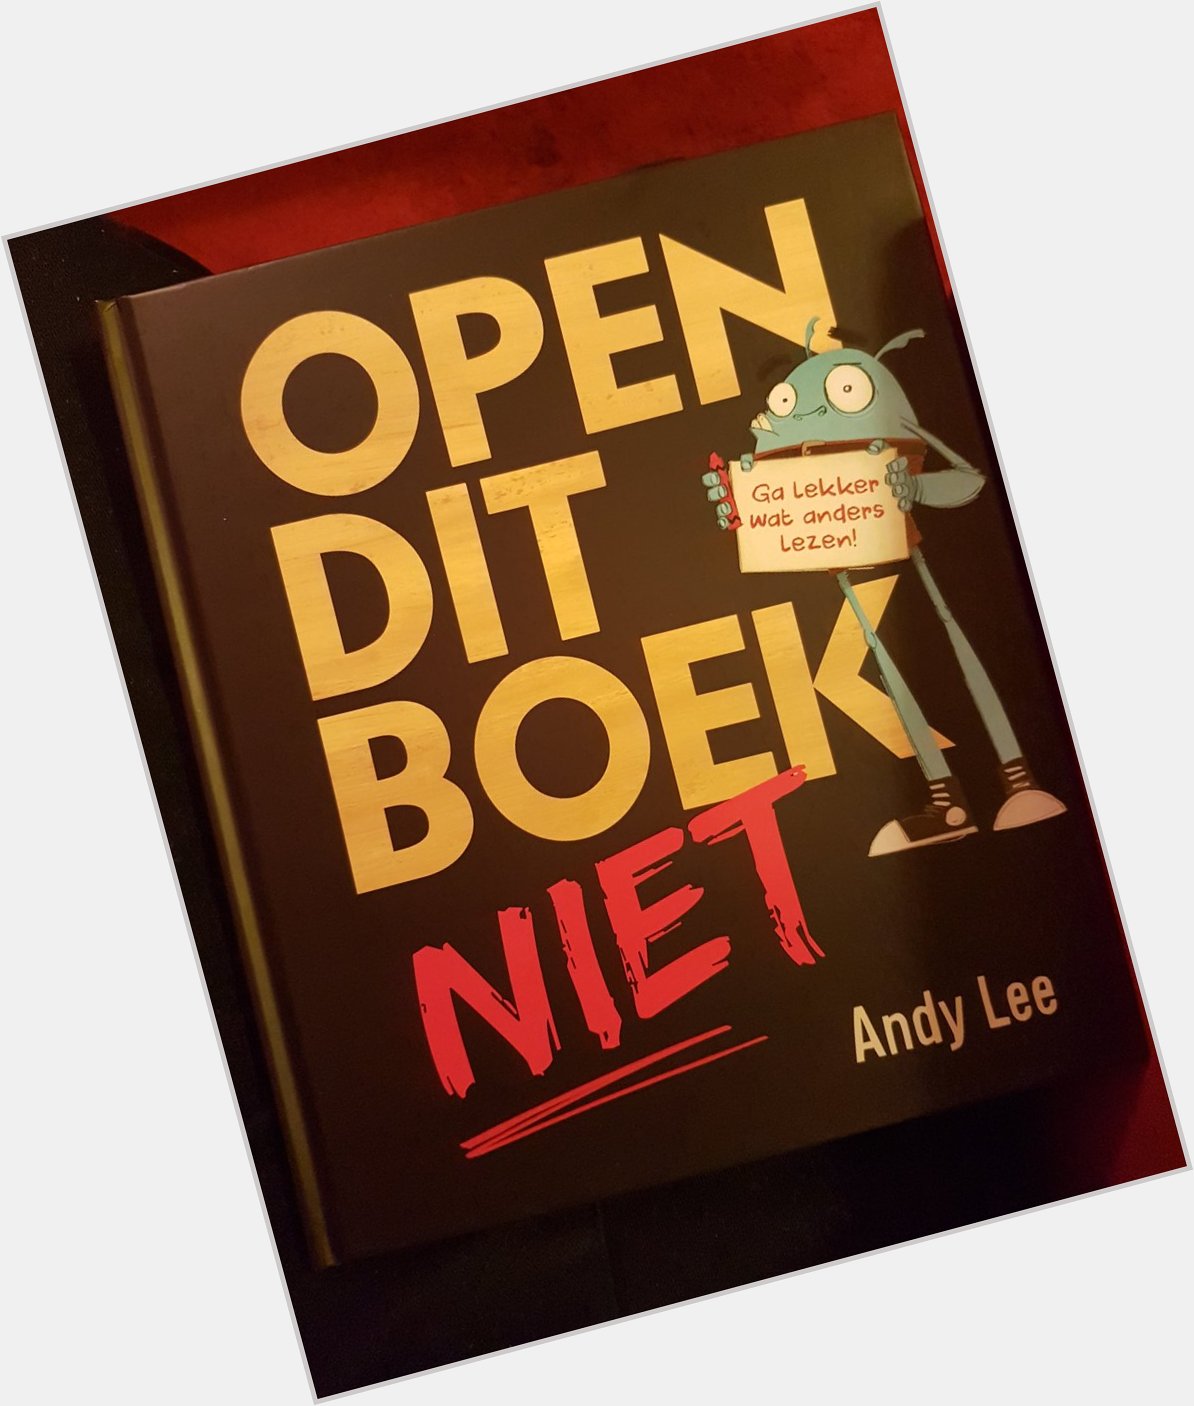 Such an amazing book. Nicely done By the way, happy birthday! (This is the Dutch version) 